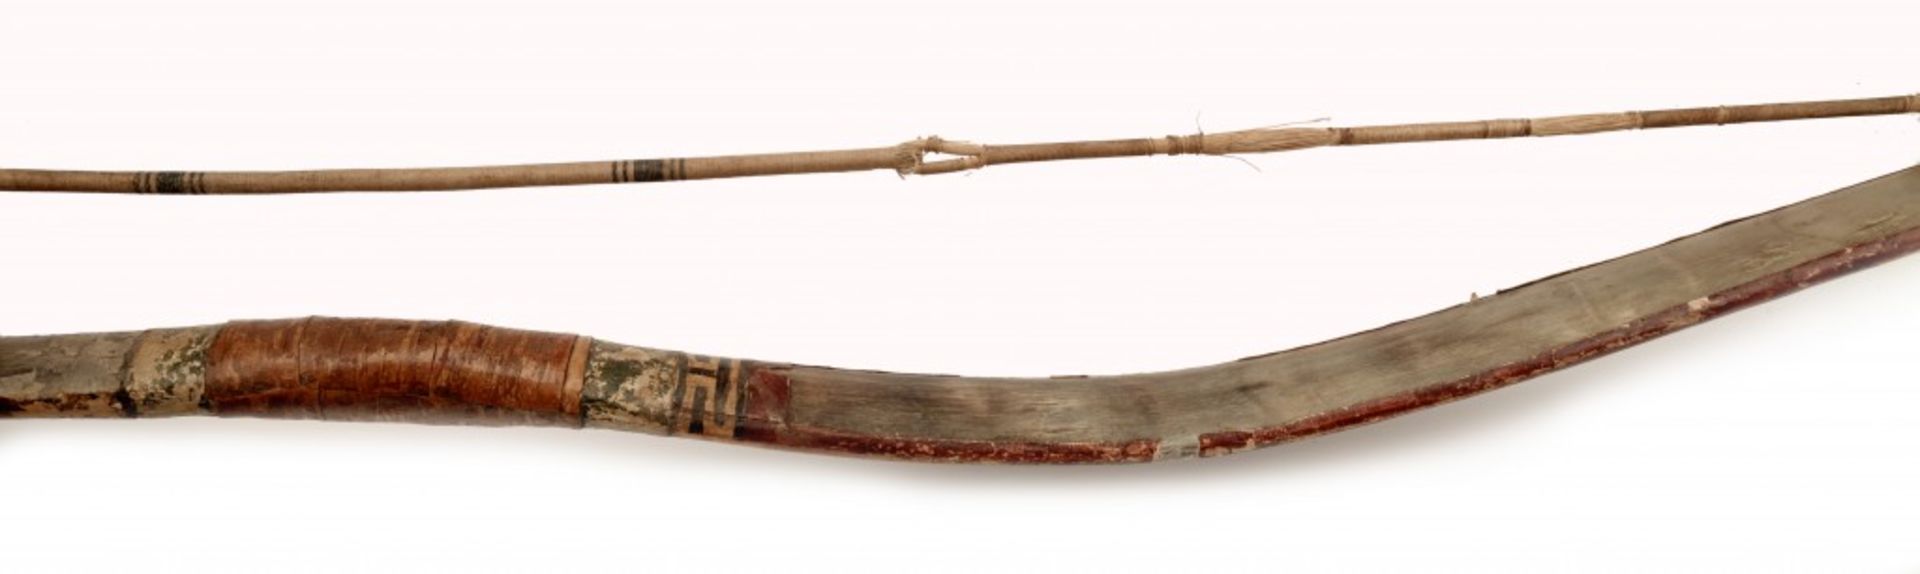 A Large Ottoman Reflex Bow - Image 4 of 4